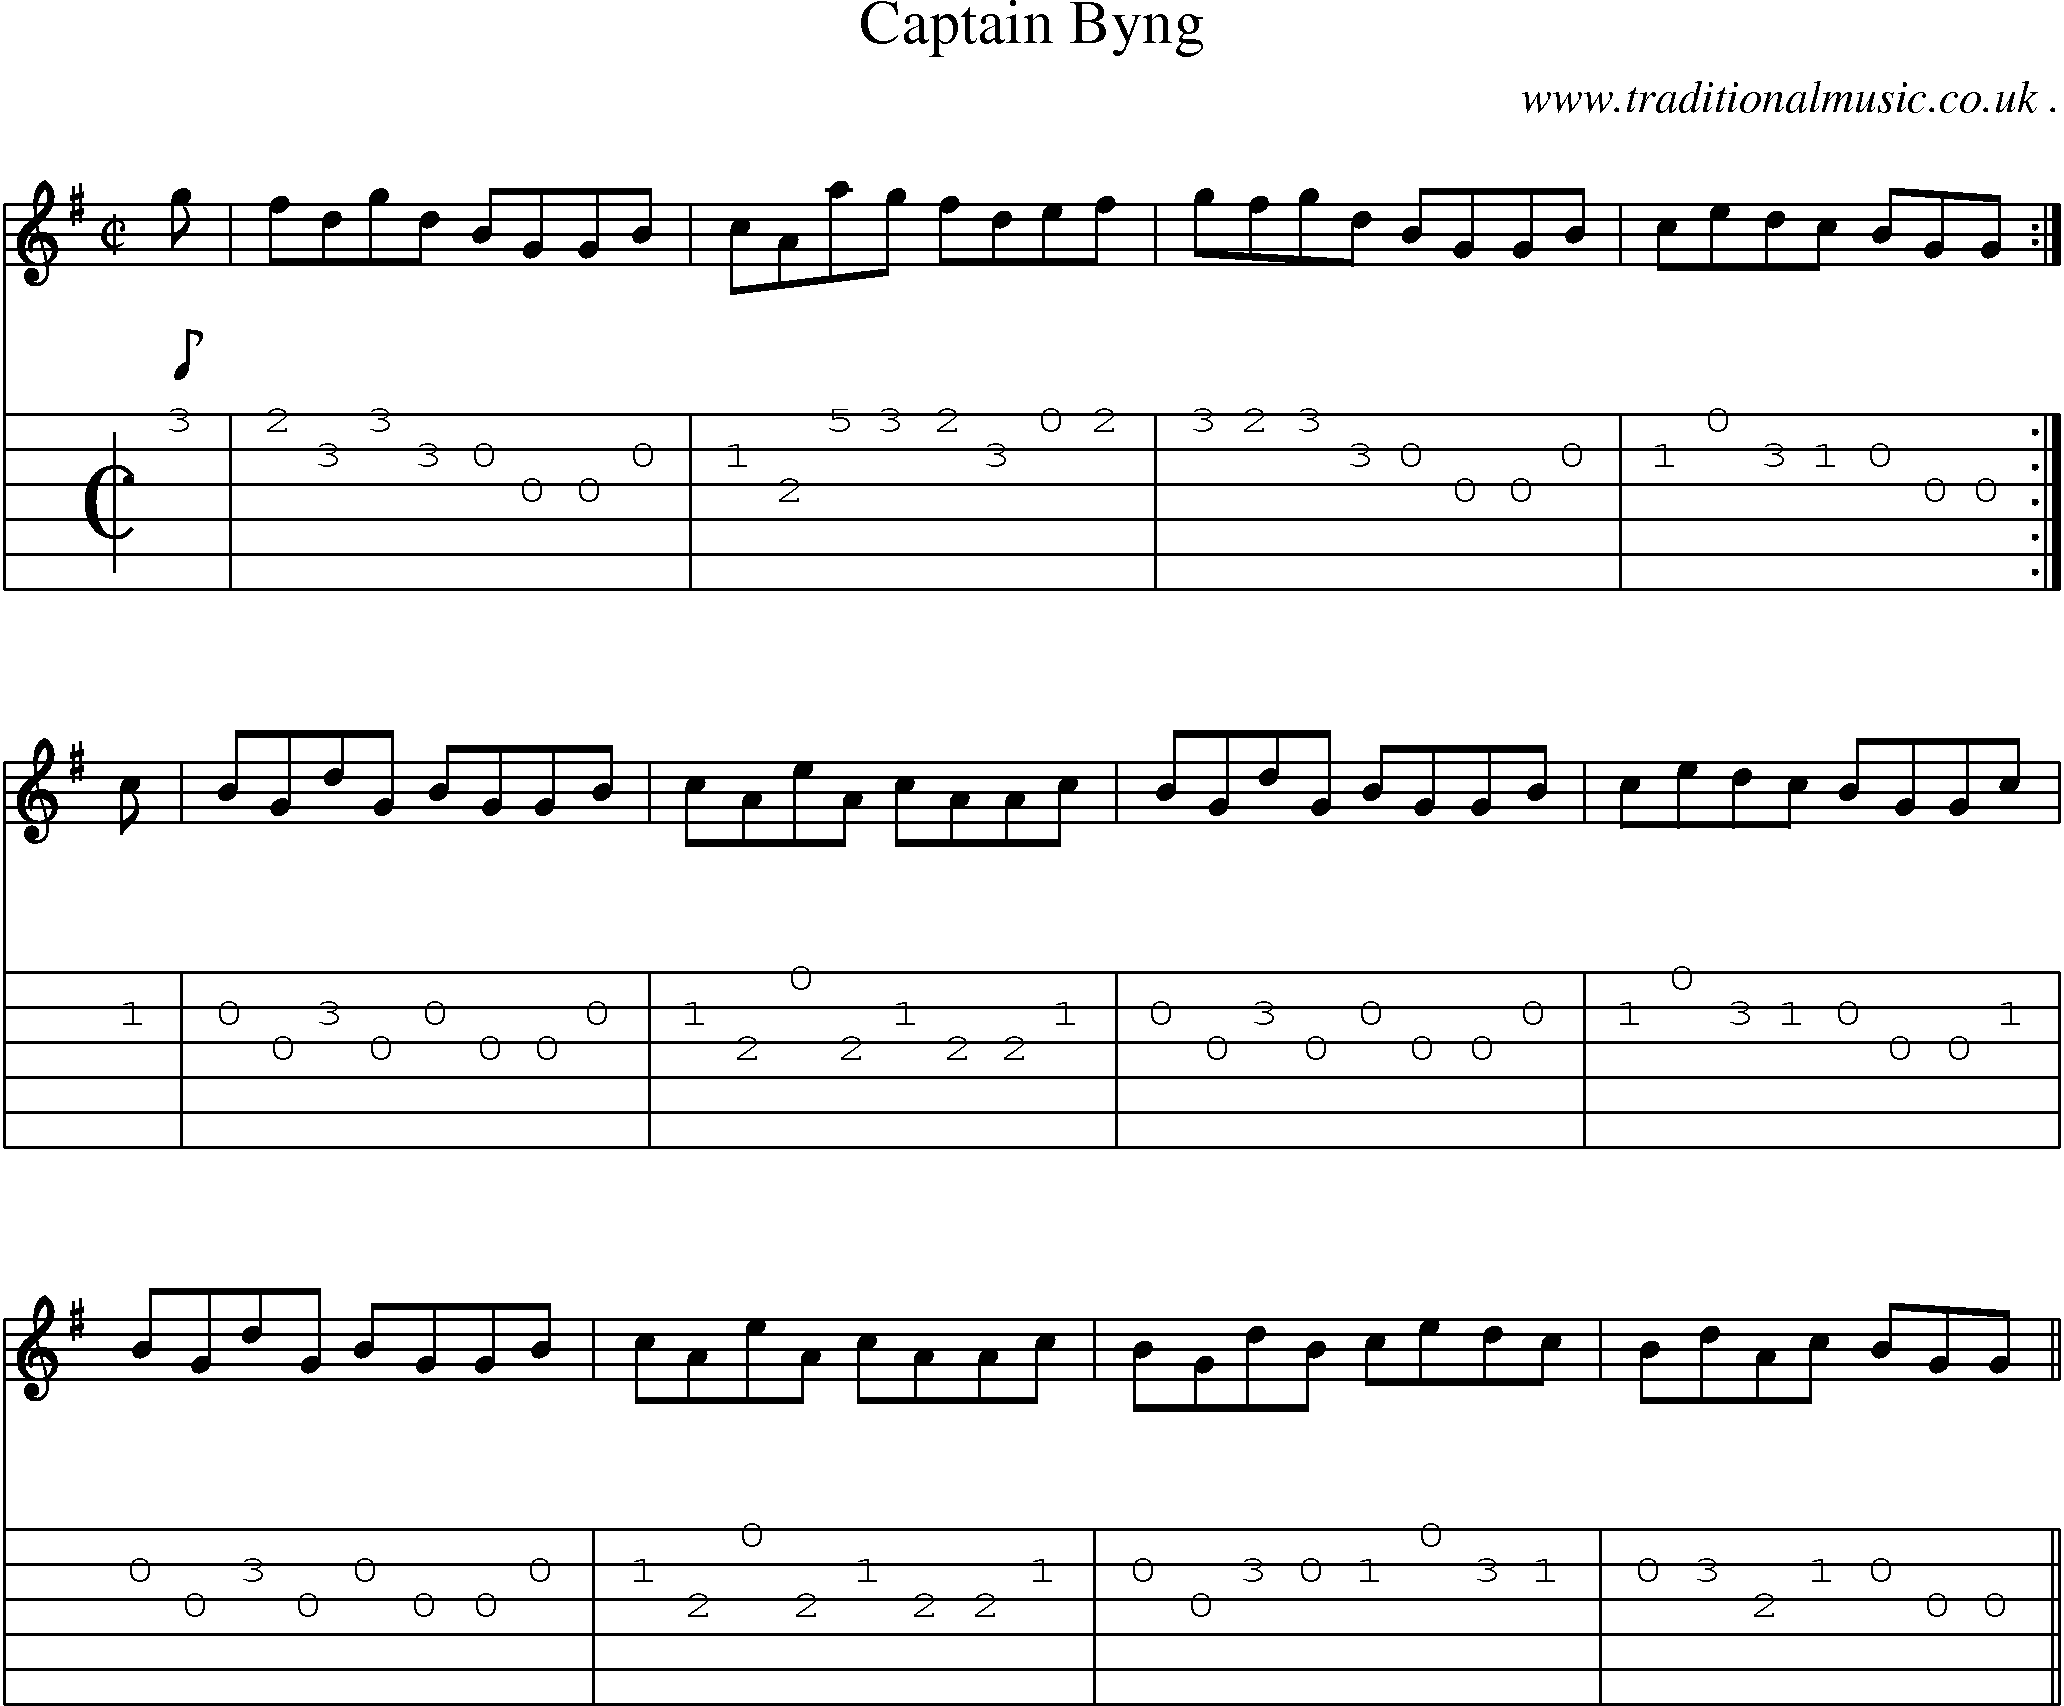 Sheet-music  score, Chords and Guitar Tabs for Captain Byng